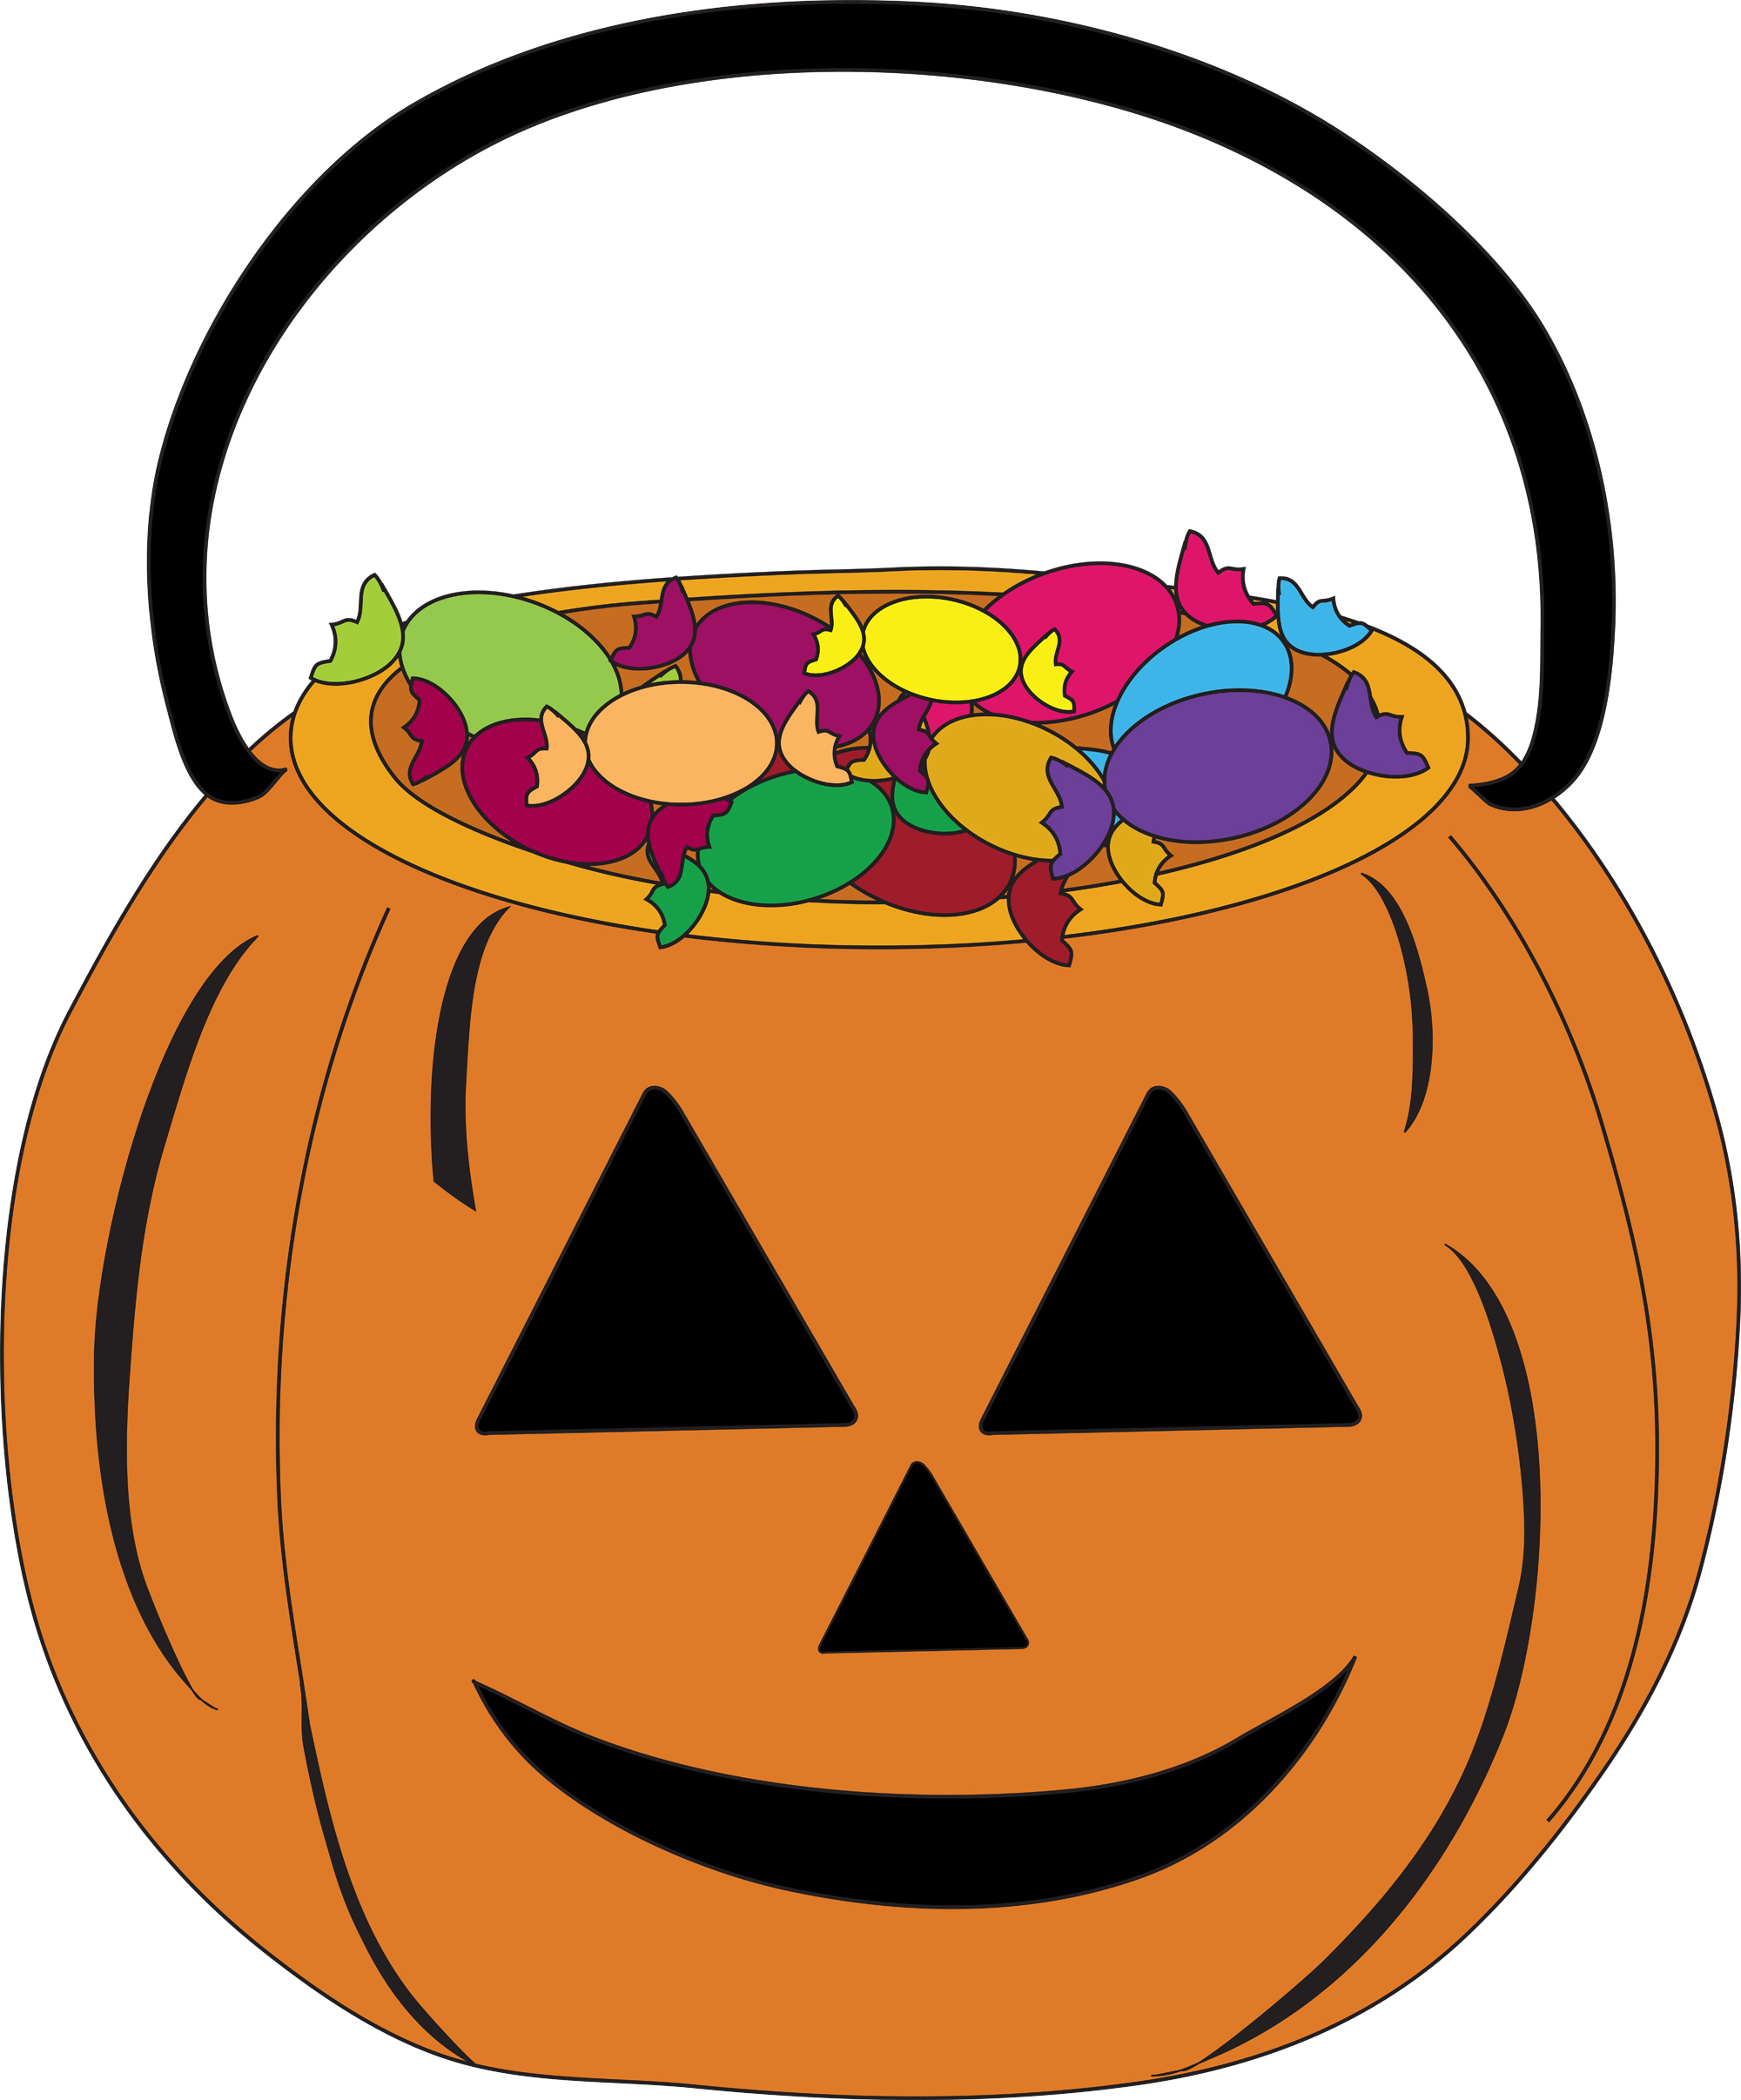 Halloween Candy Border Clip Art | Clipart Panda - Free Clipart Images